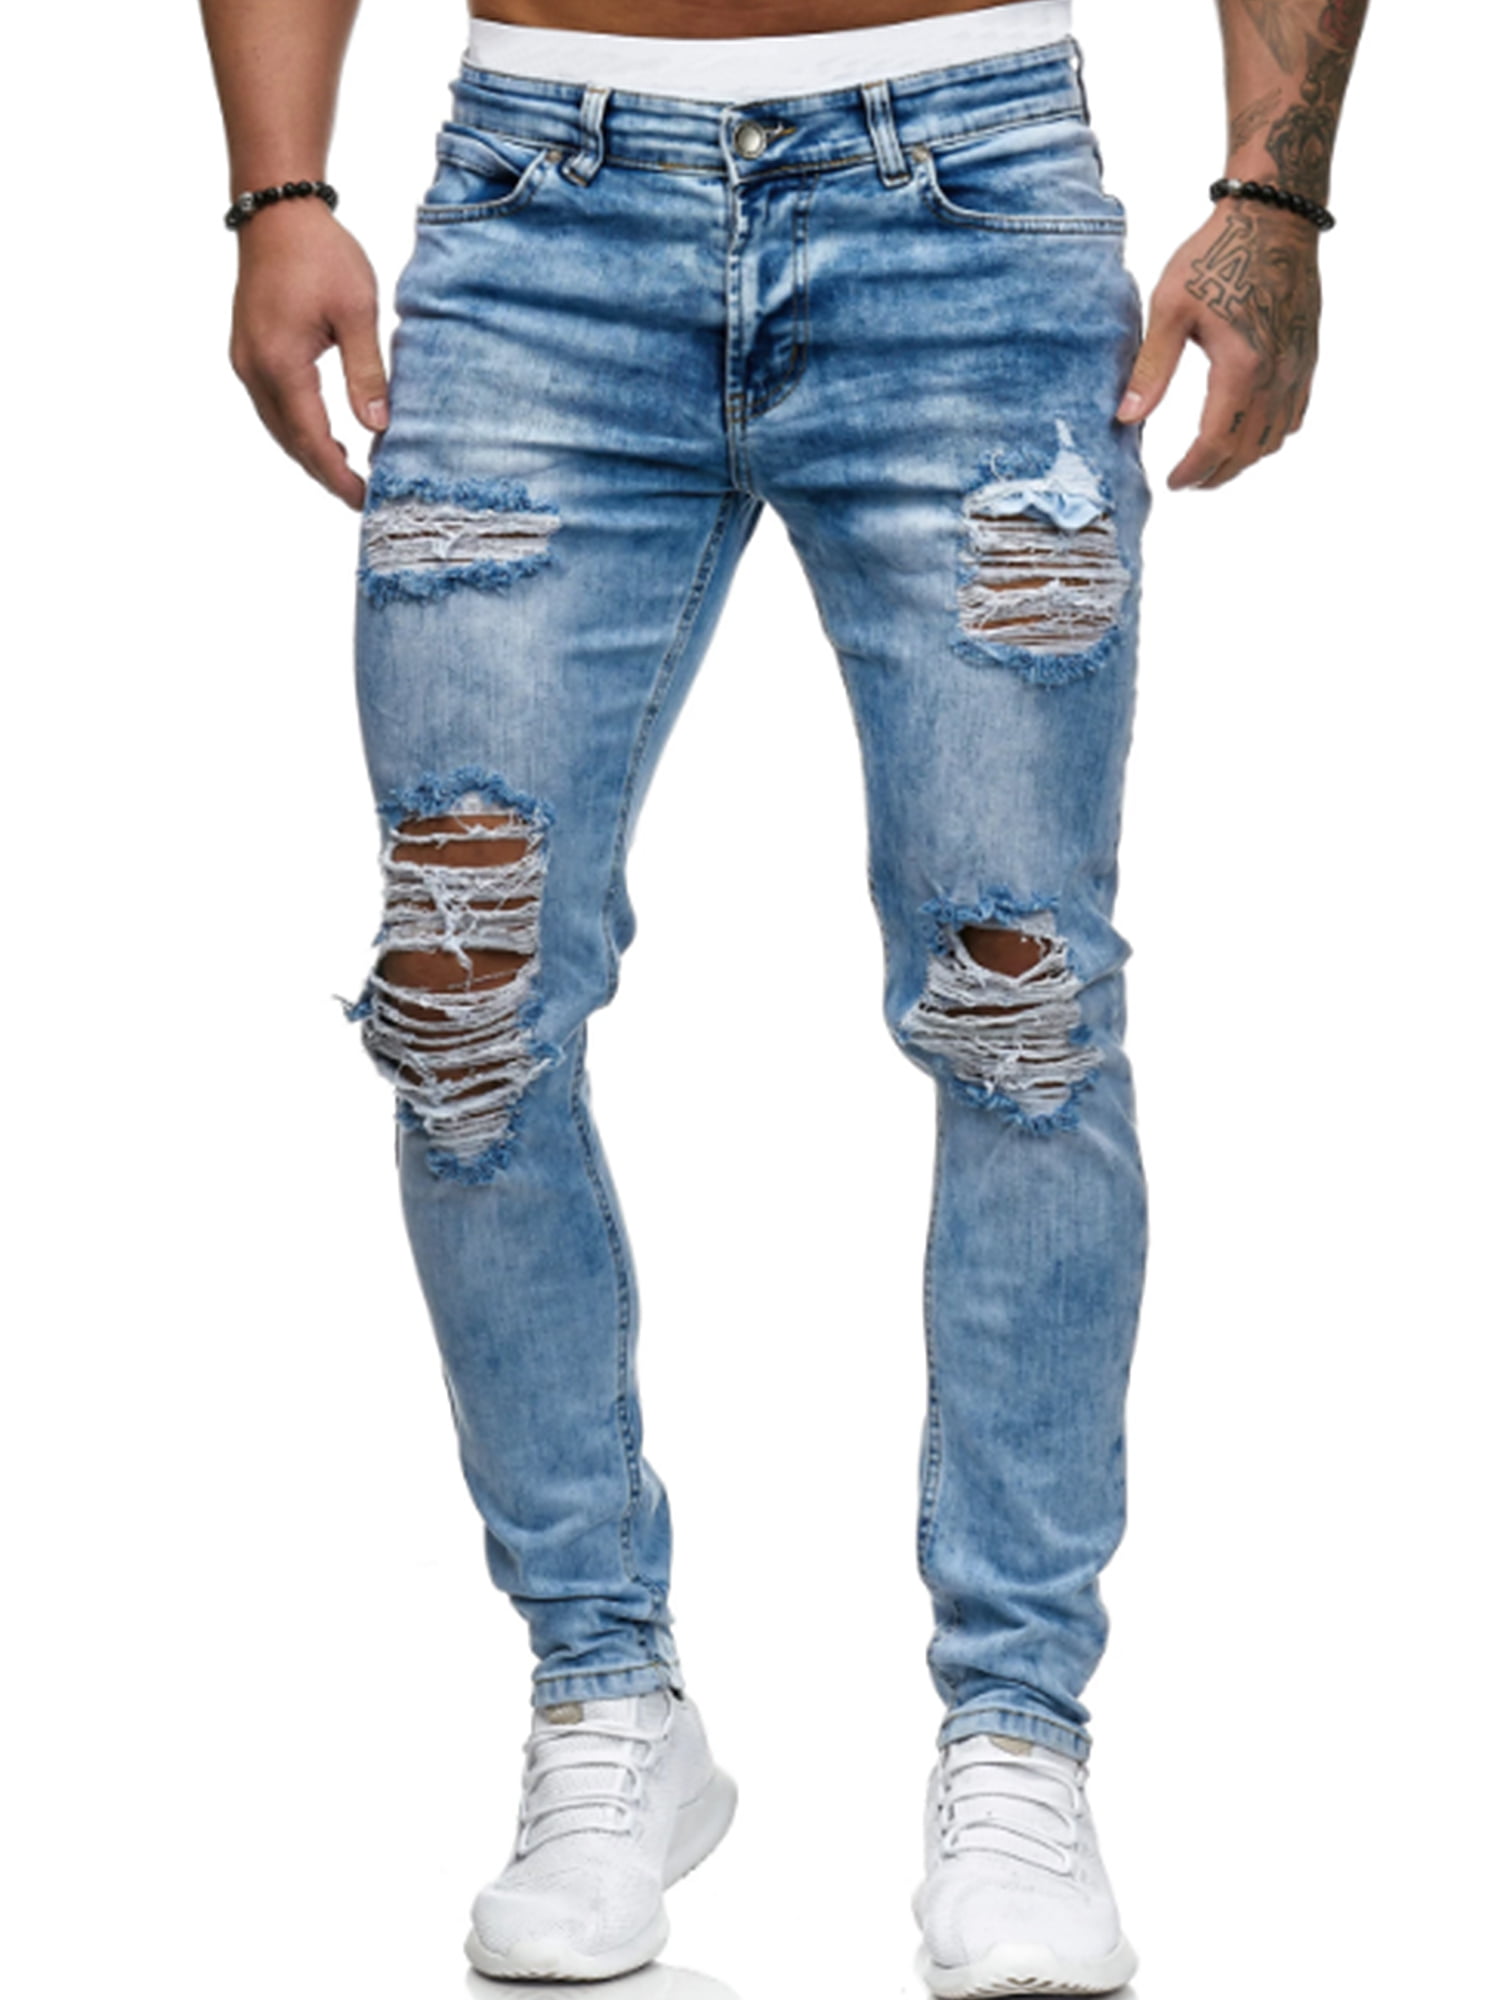 Mens Stretchy Jeans Ripped Skinny Jeans Destroyed Frayed Slim Fit Denim Pants